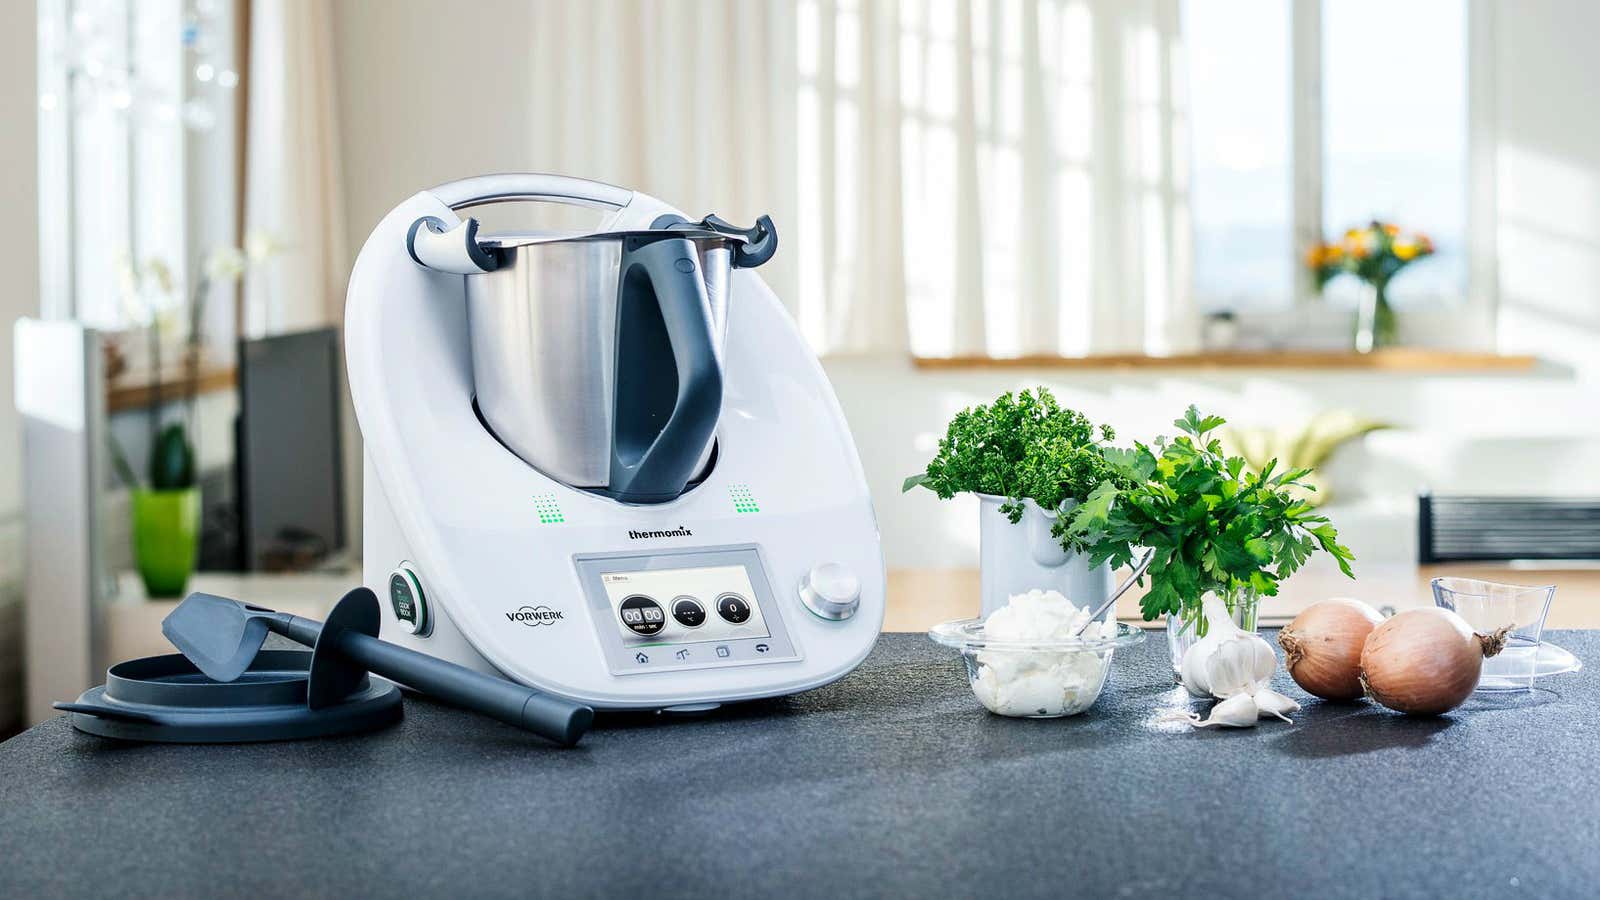 Thermomix, Vorwerks $1,450 kitchen appliance, is coming to the US pic image